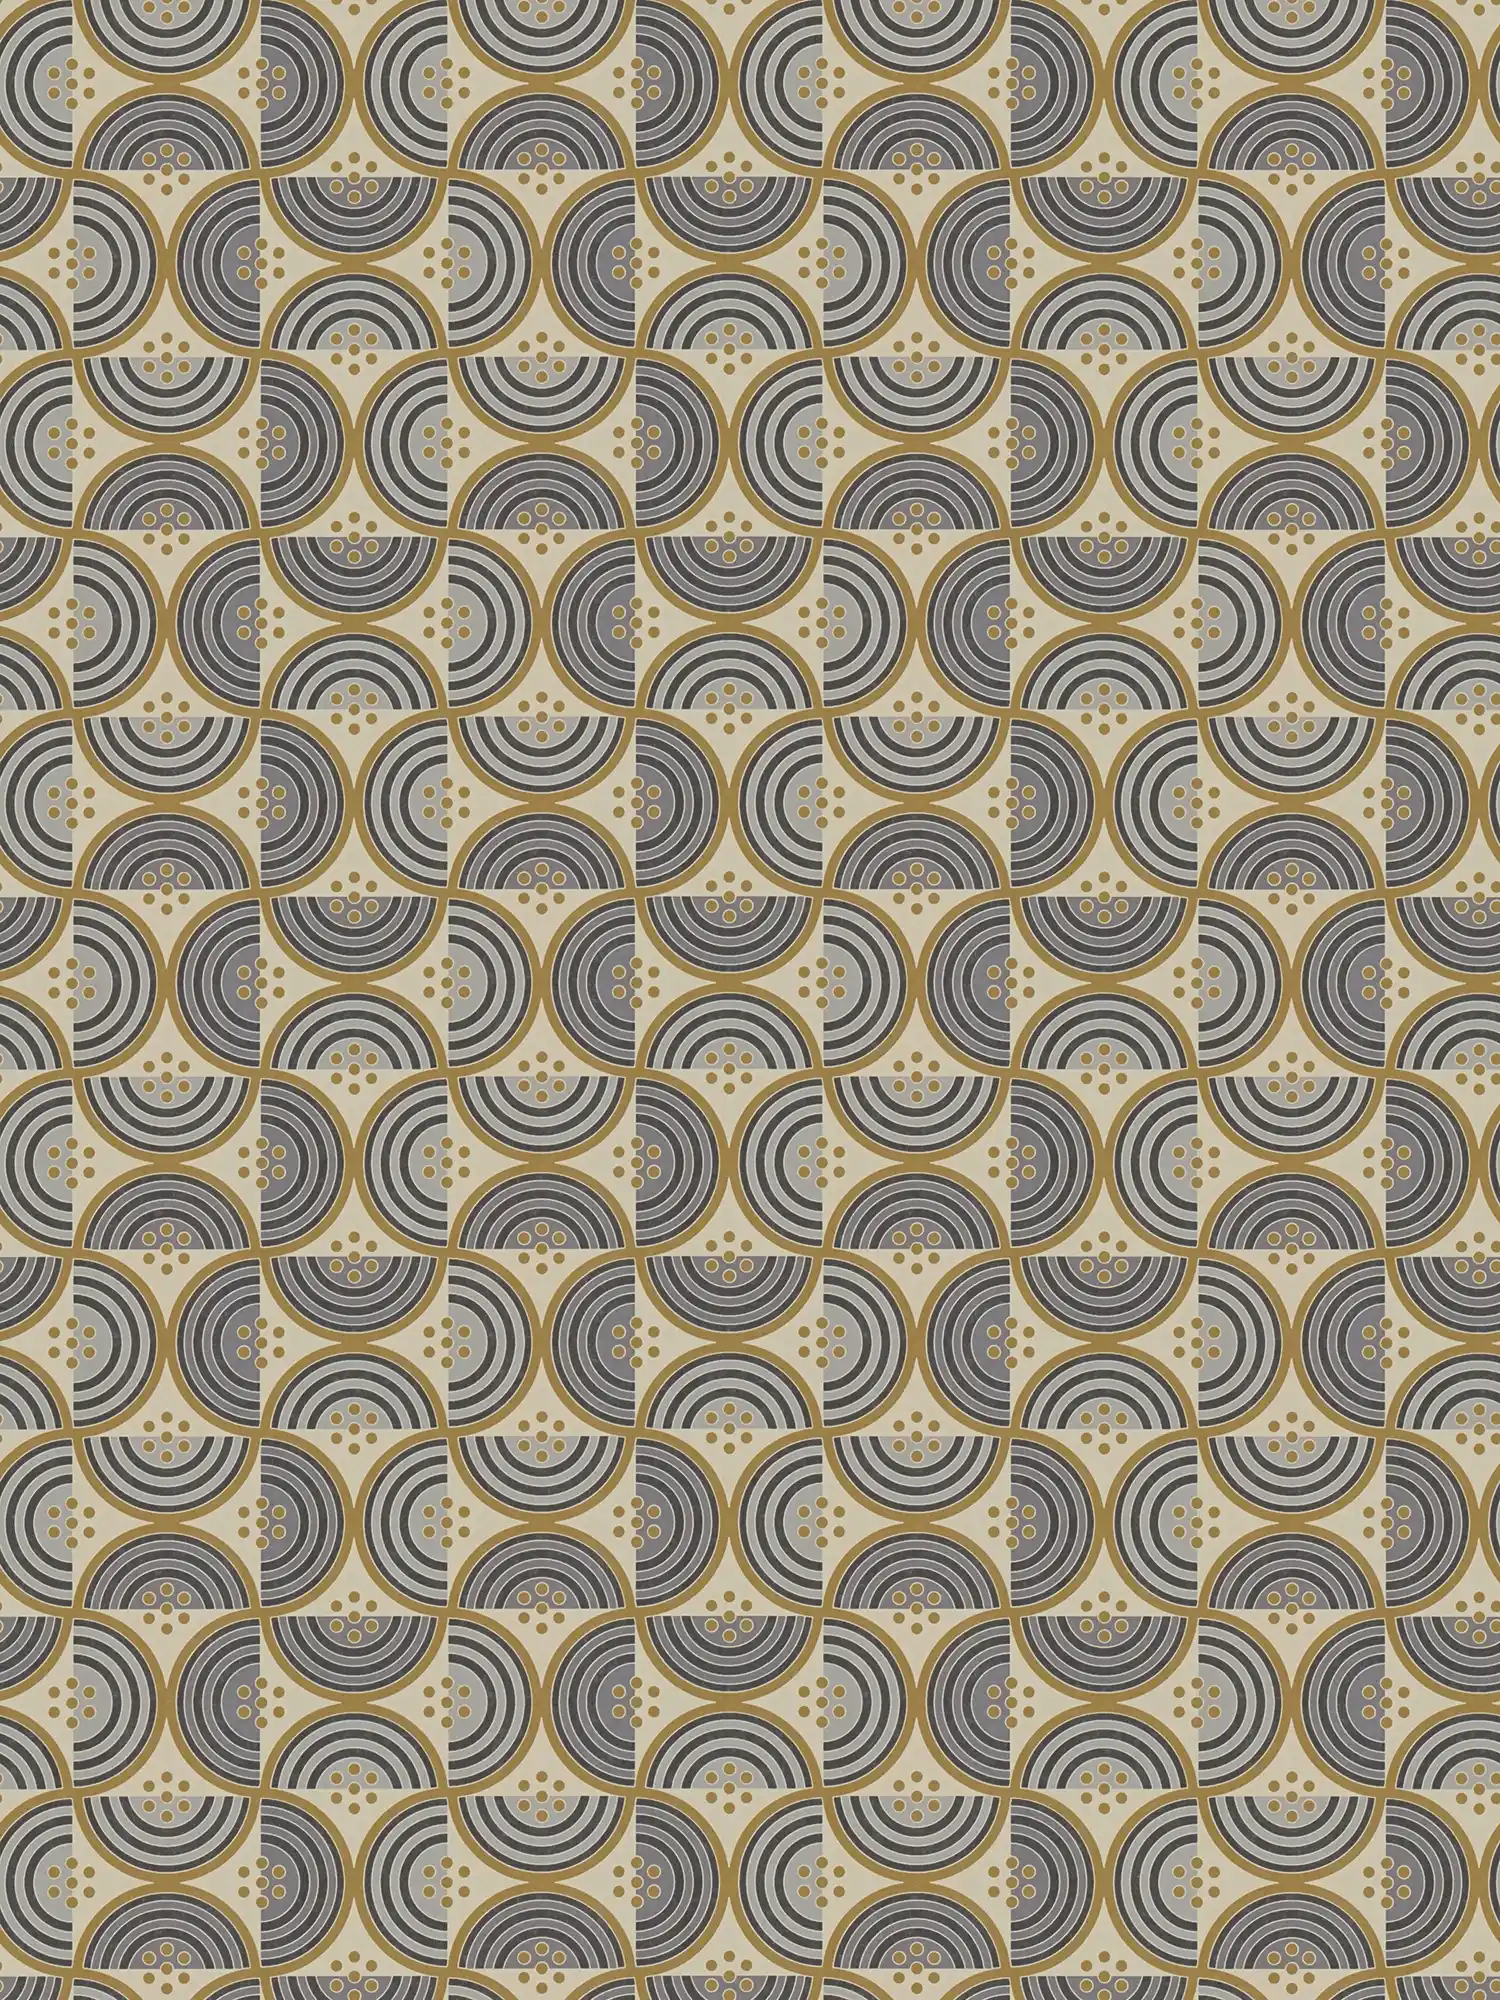 Non-woven wallpaper with square pattern of semicircles and dots - yellow, grey, black
